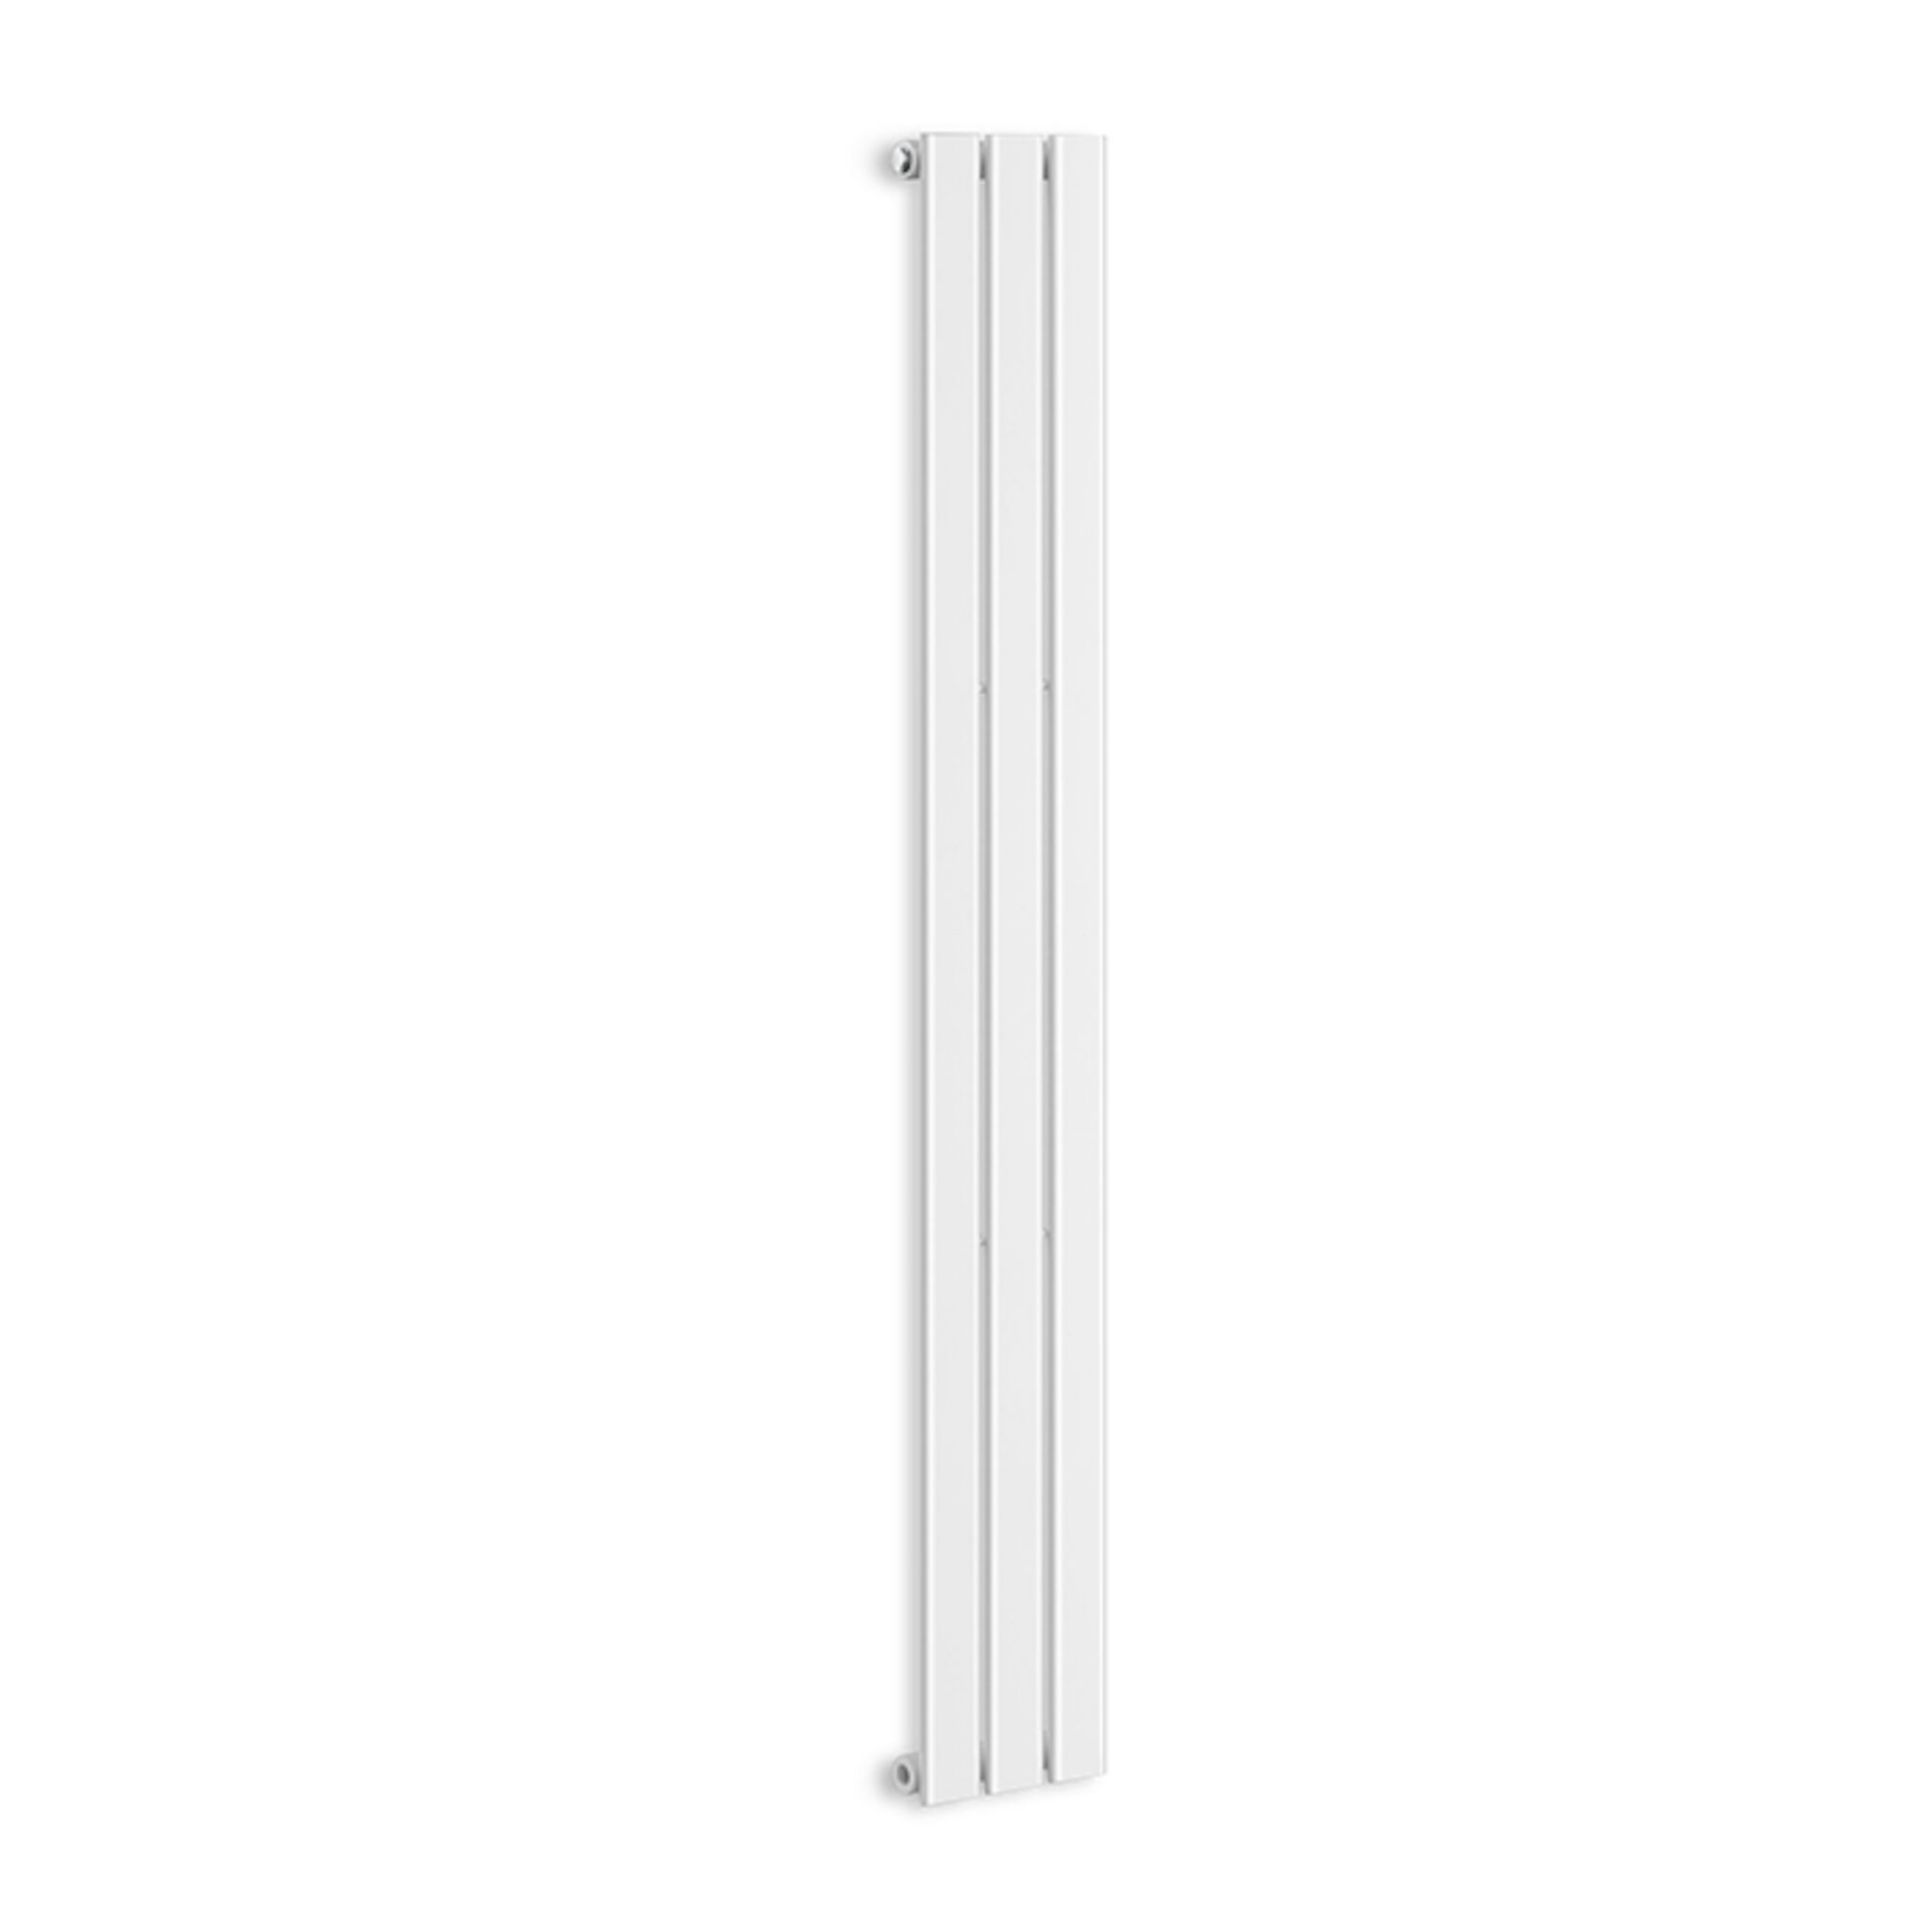 (EW154) 1600x228mm White Panel Vertical Radiator. RRP £209.99. Made from low carbon steel with a